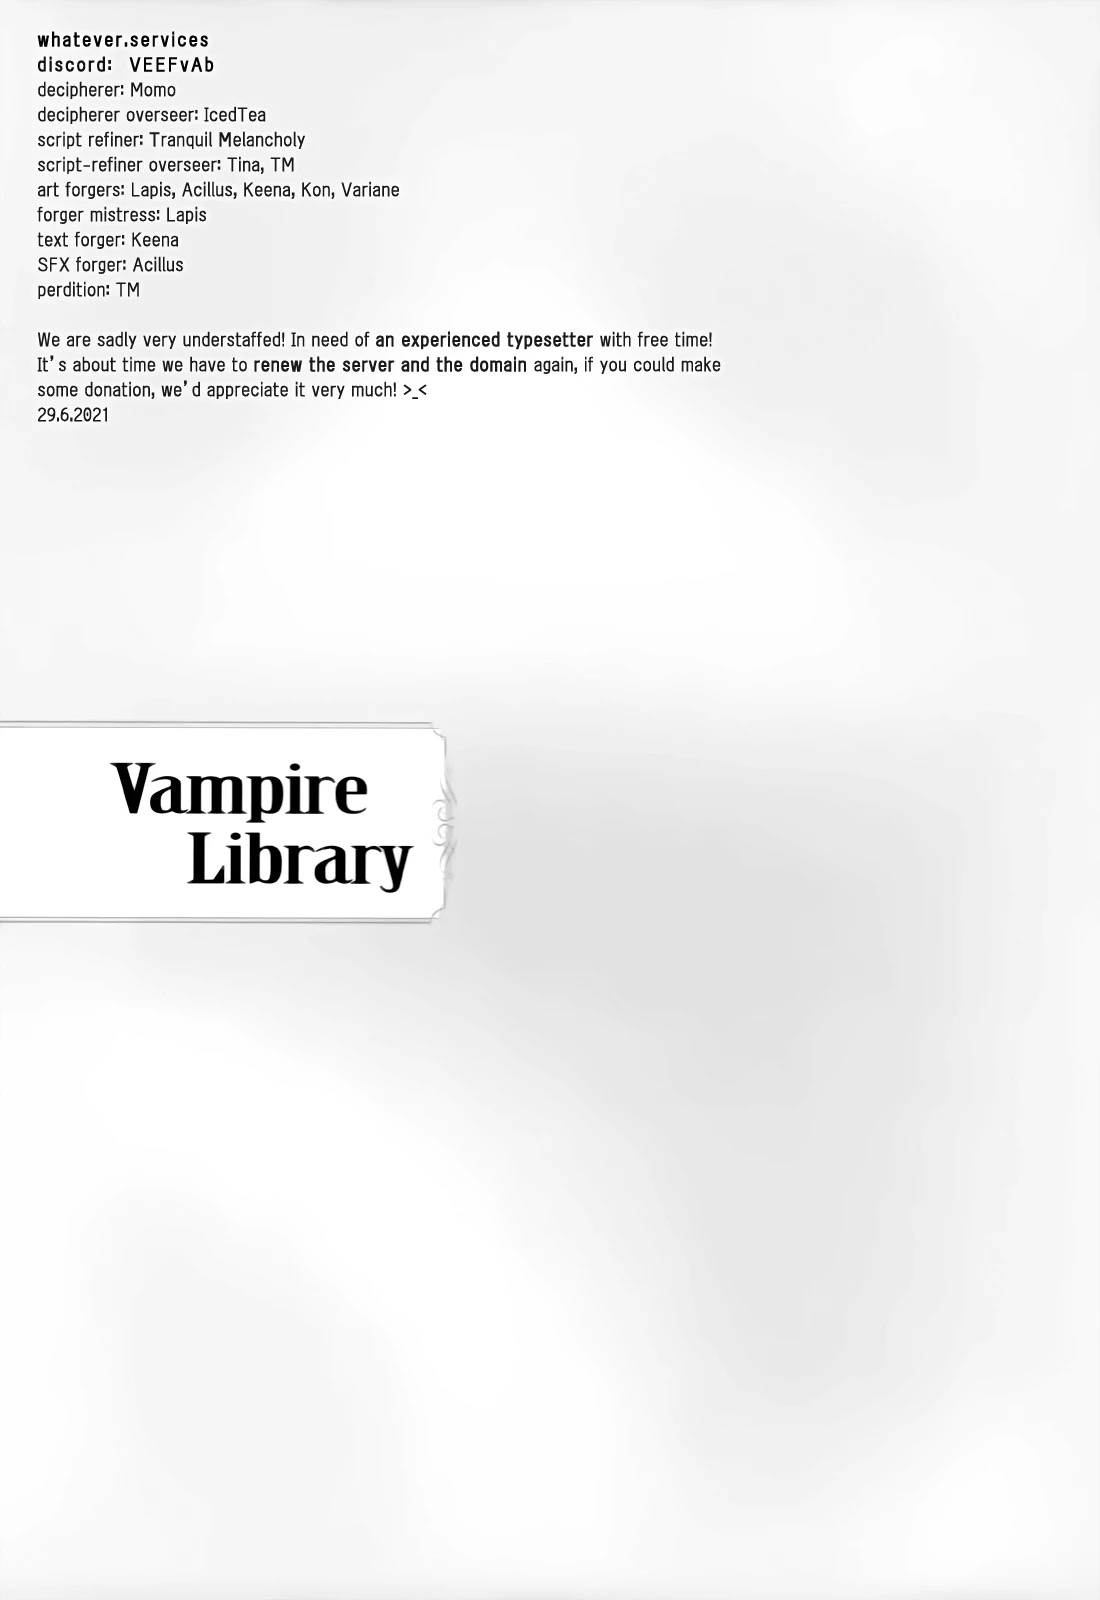 Vampire Library - Page 1